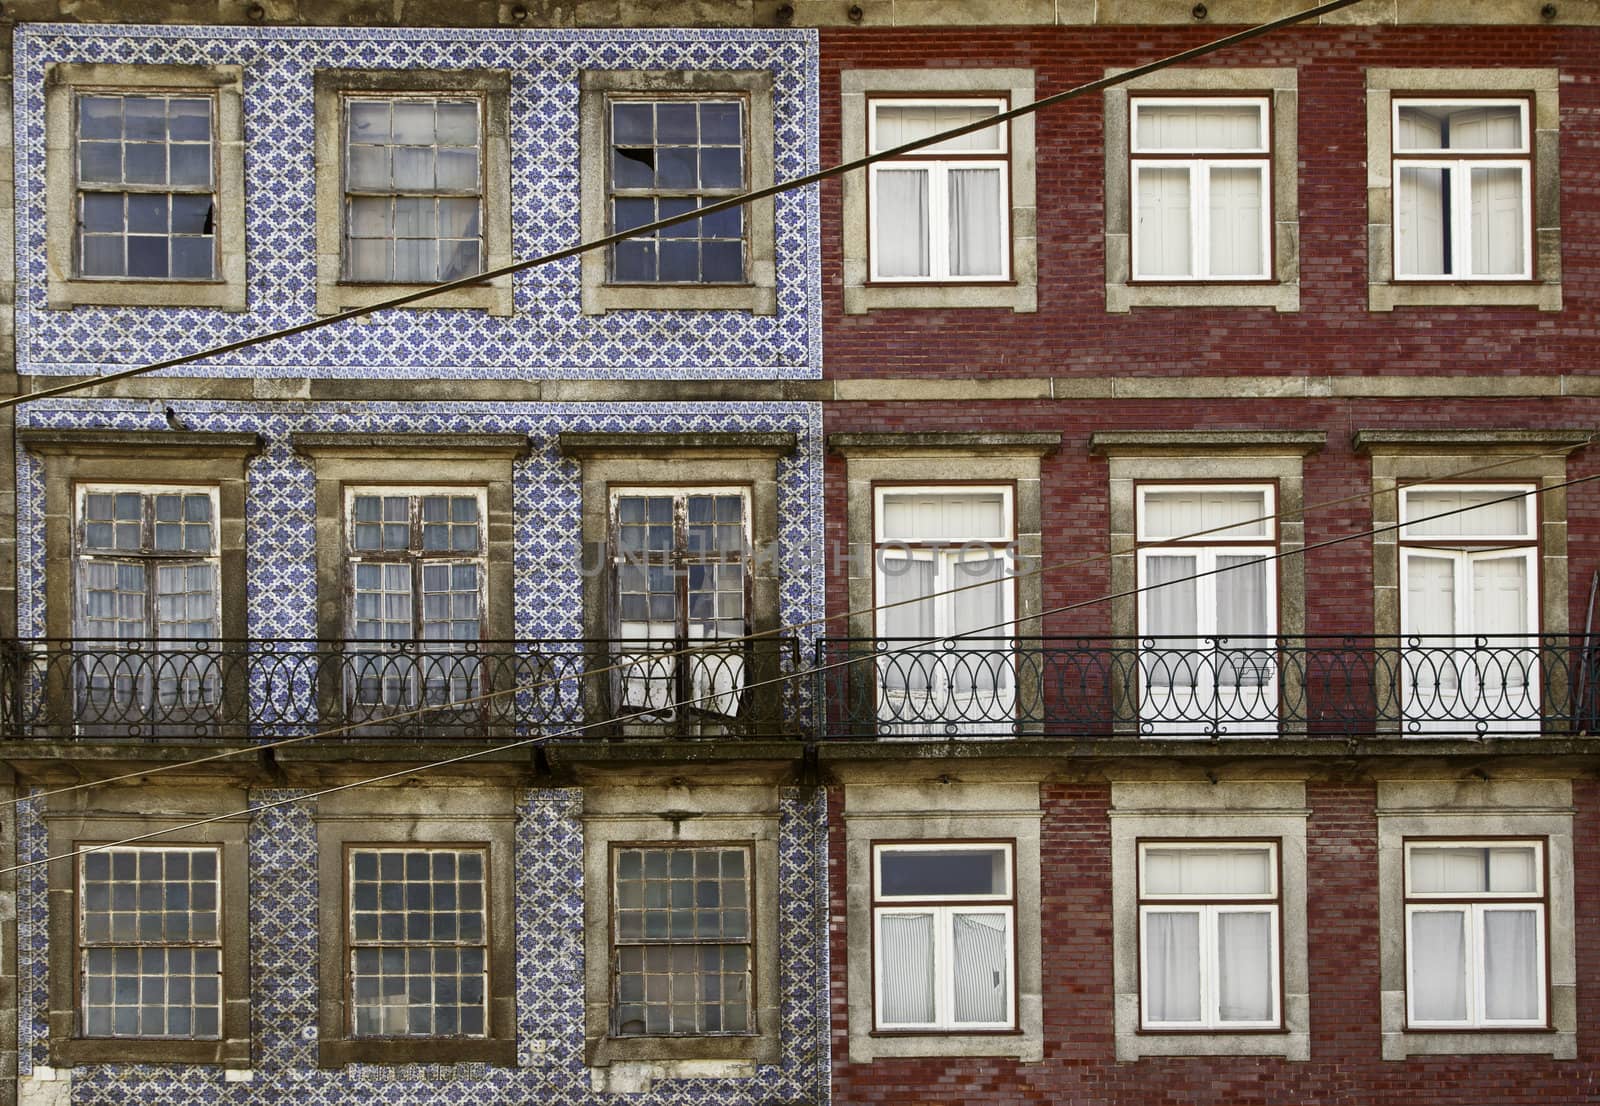 Old facade Portuguese detall some buildings decorated with tiles